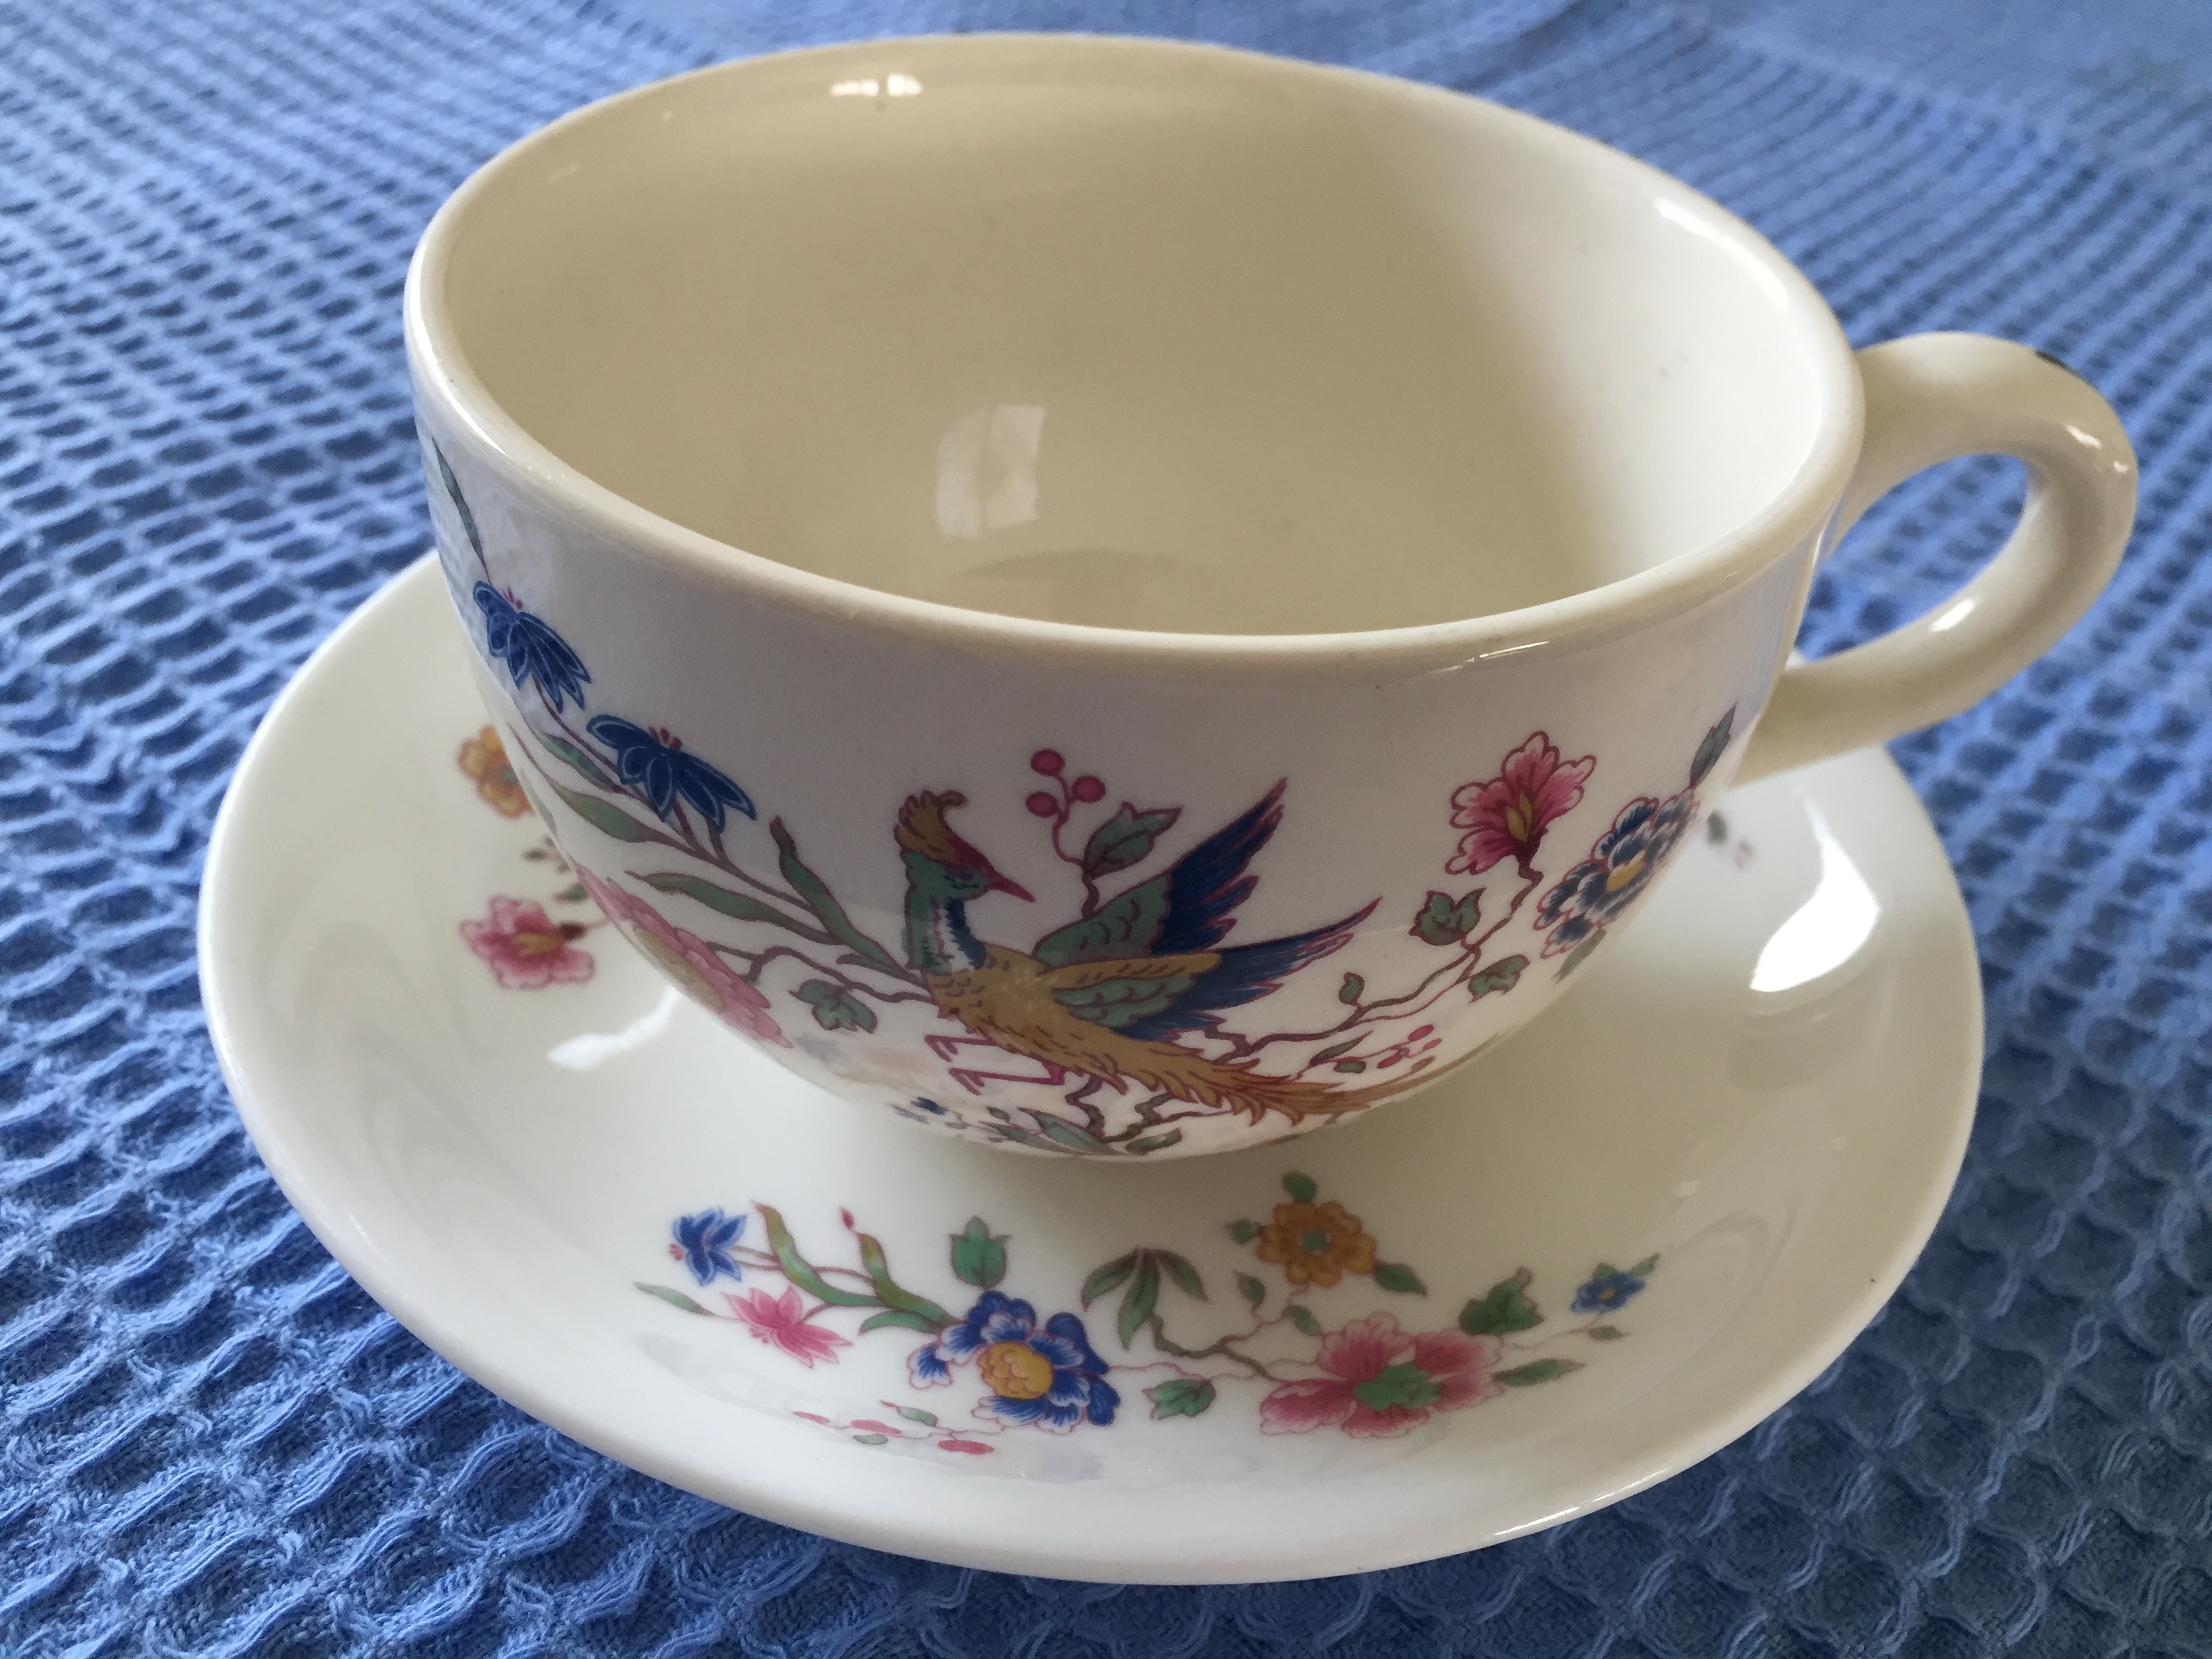 ORIGINAL CUP AND SAUCER FROM THE FURNESS LINE SHIPPING COMPANY